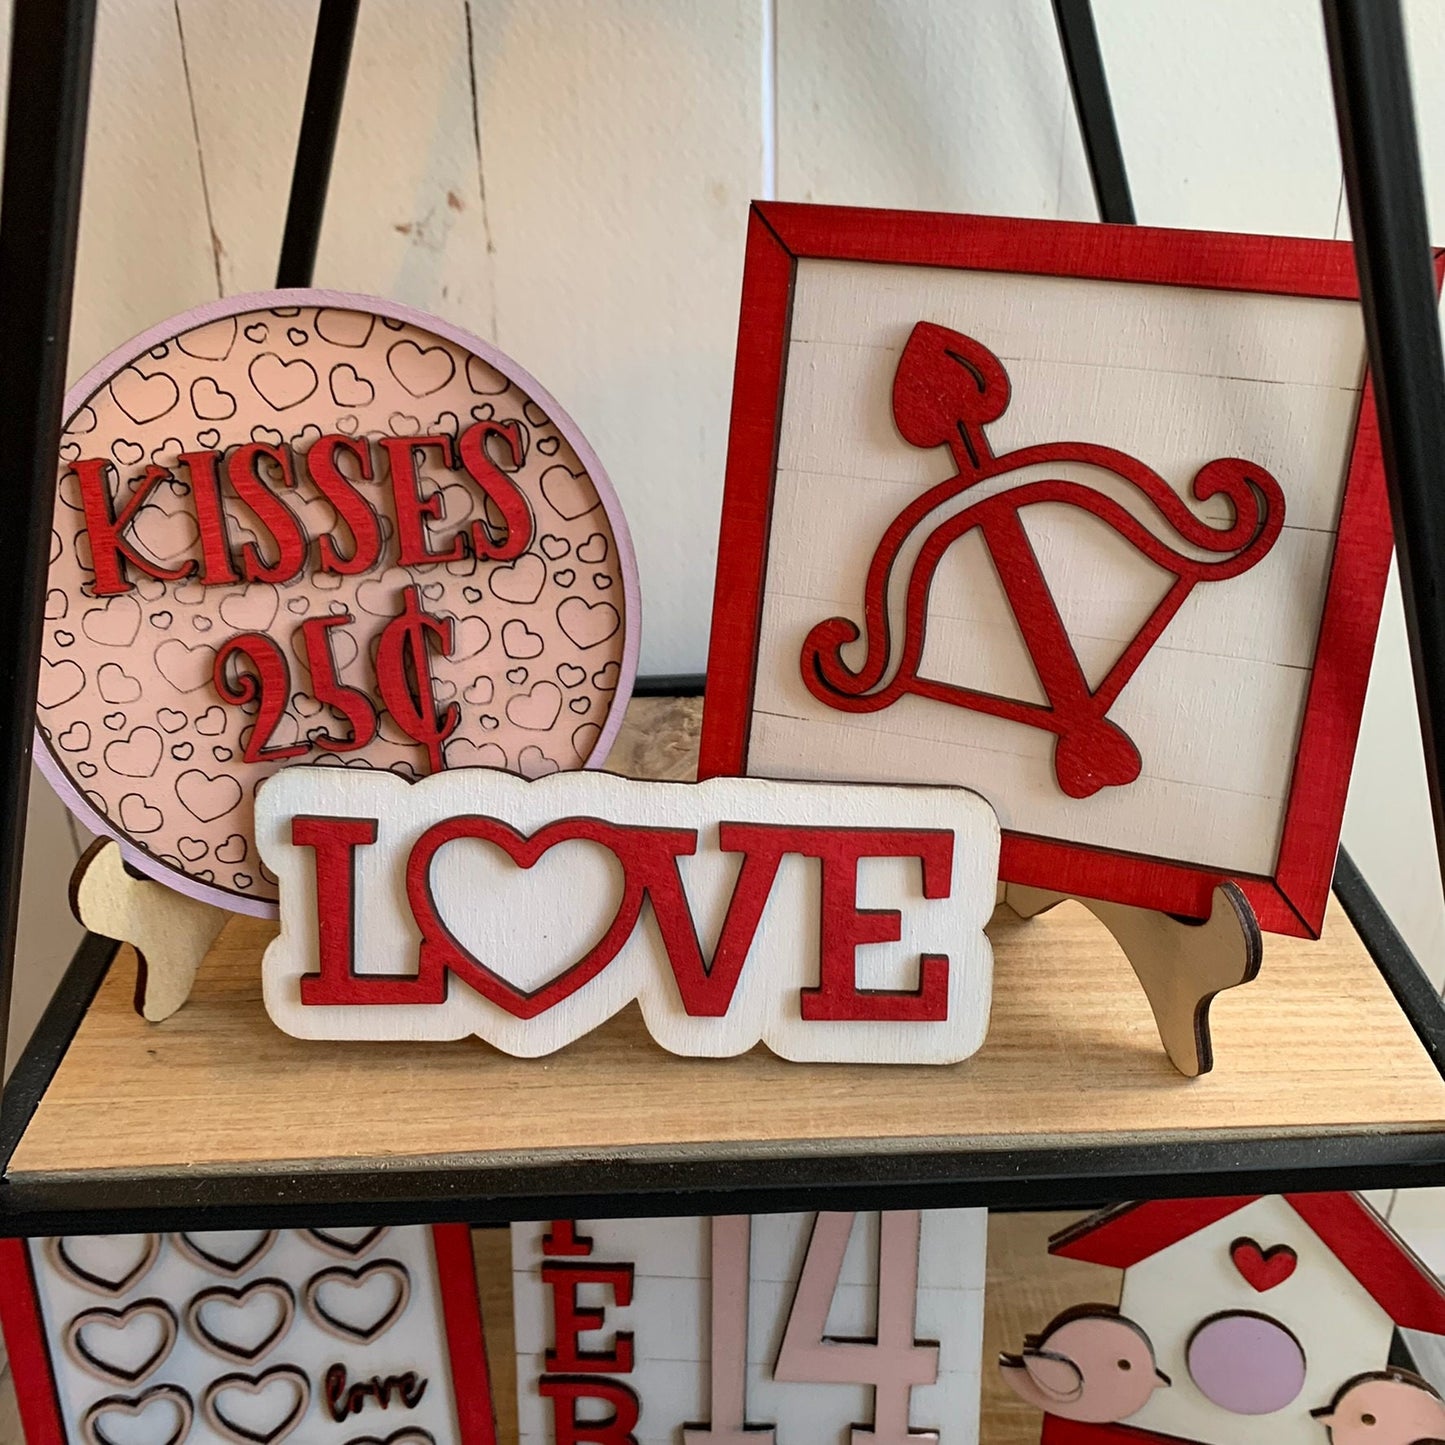 Valentine's Day Tiered Tray Decor - Laser Cut Wood Painted, Love and Kisses Signs, Small Home Decorations for Valentine's Day